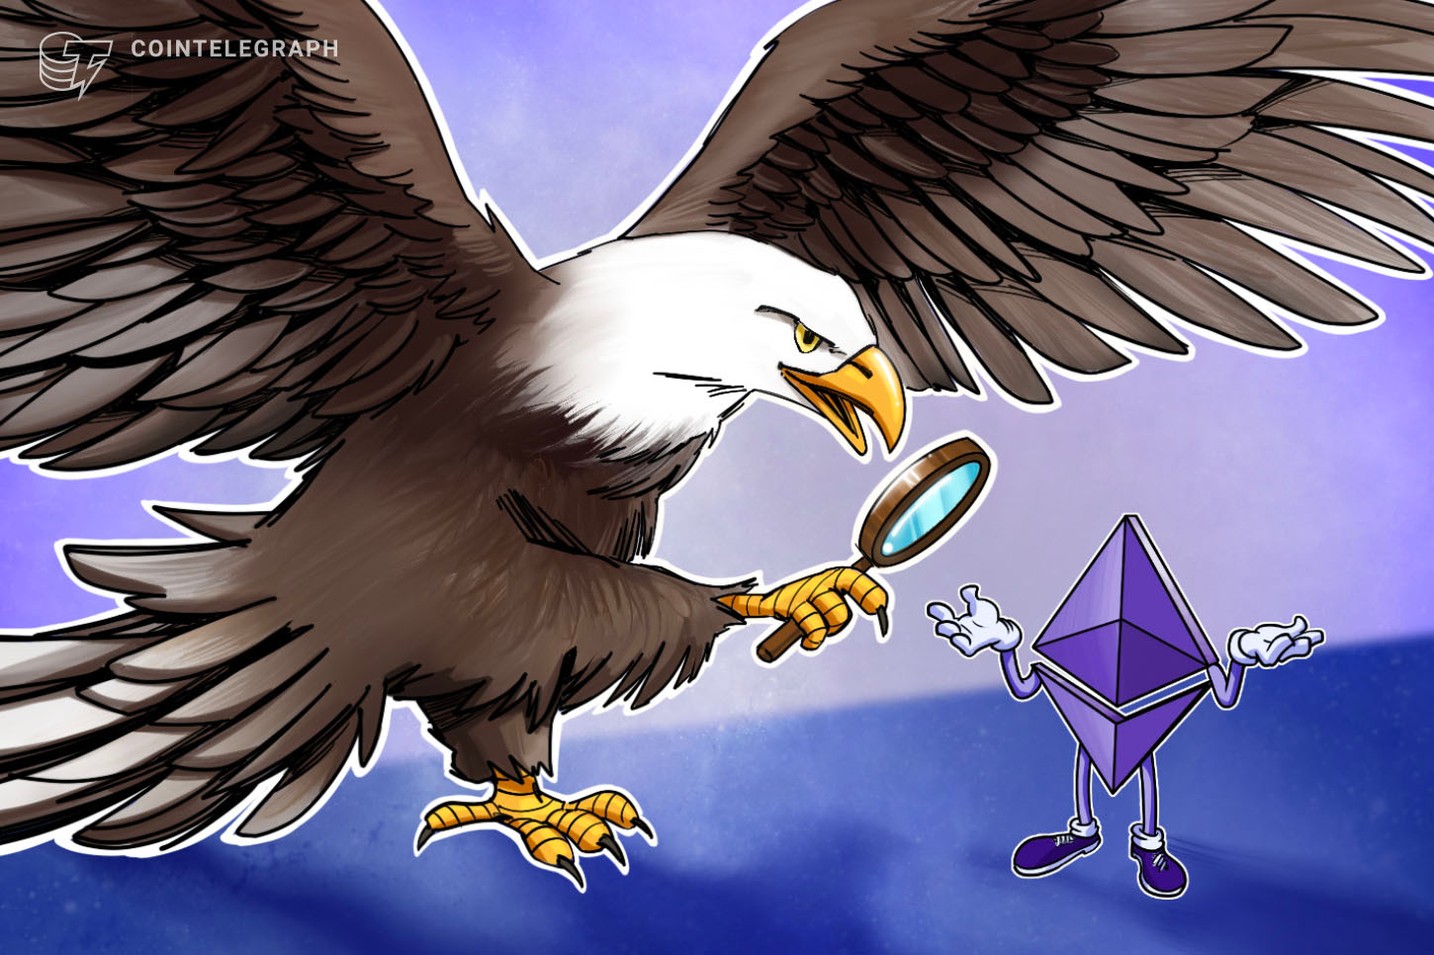 Hinman docs unsealed: SEC concerned over ‘Ether is not a security’ statement